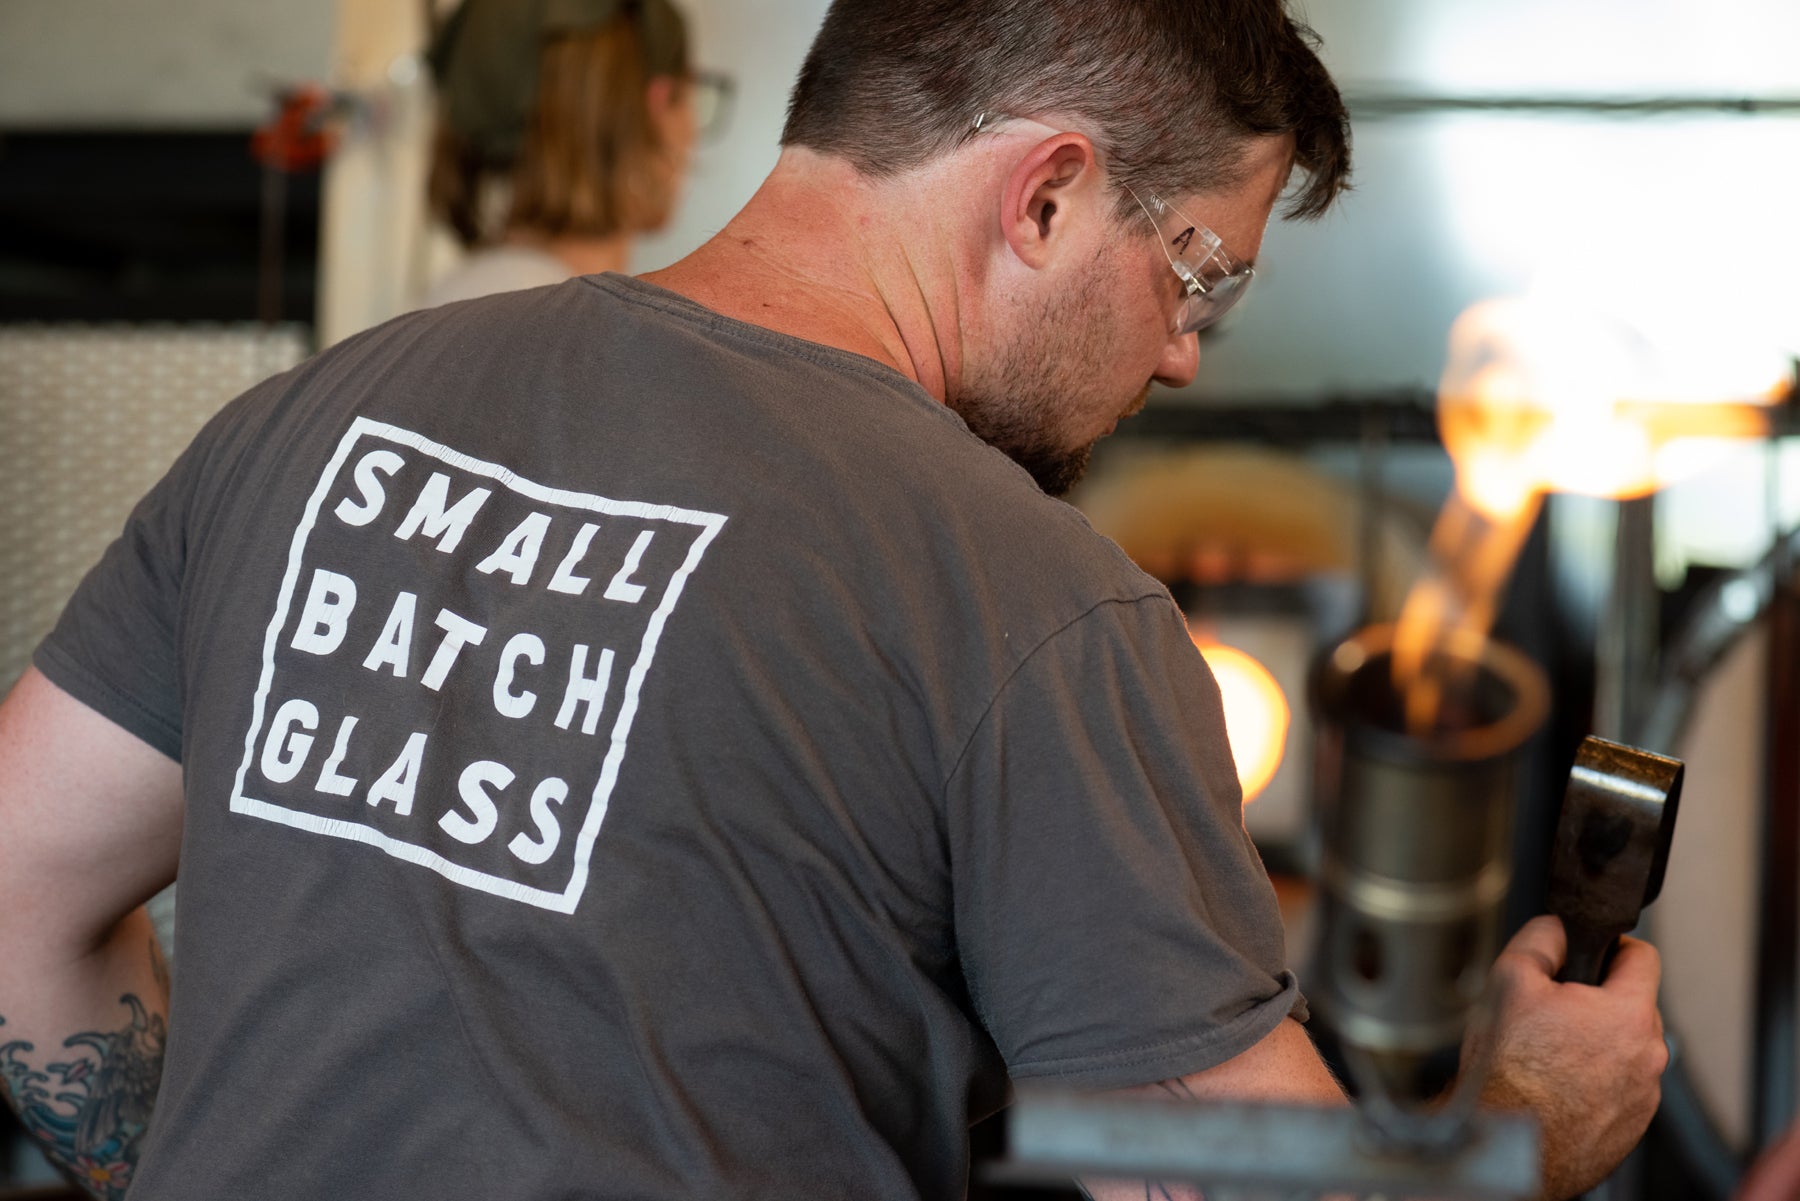 Asher Holman, the main glassblower at Small Batch Glass, from the back with flames in the foreground and a glowing furnace behind him. Image by Loam